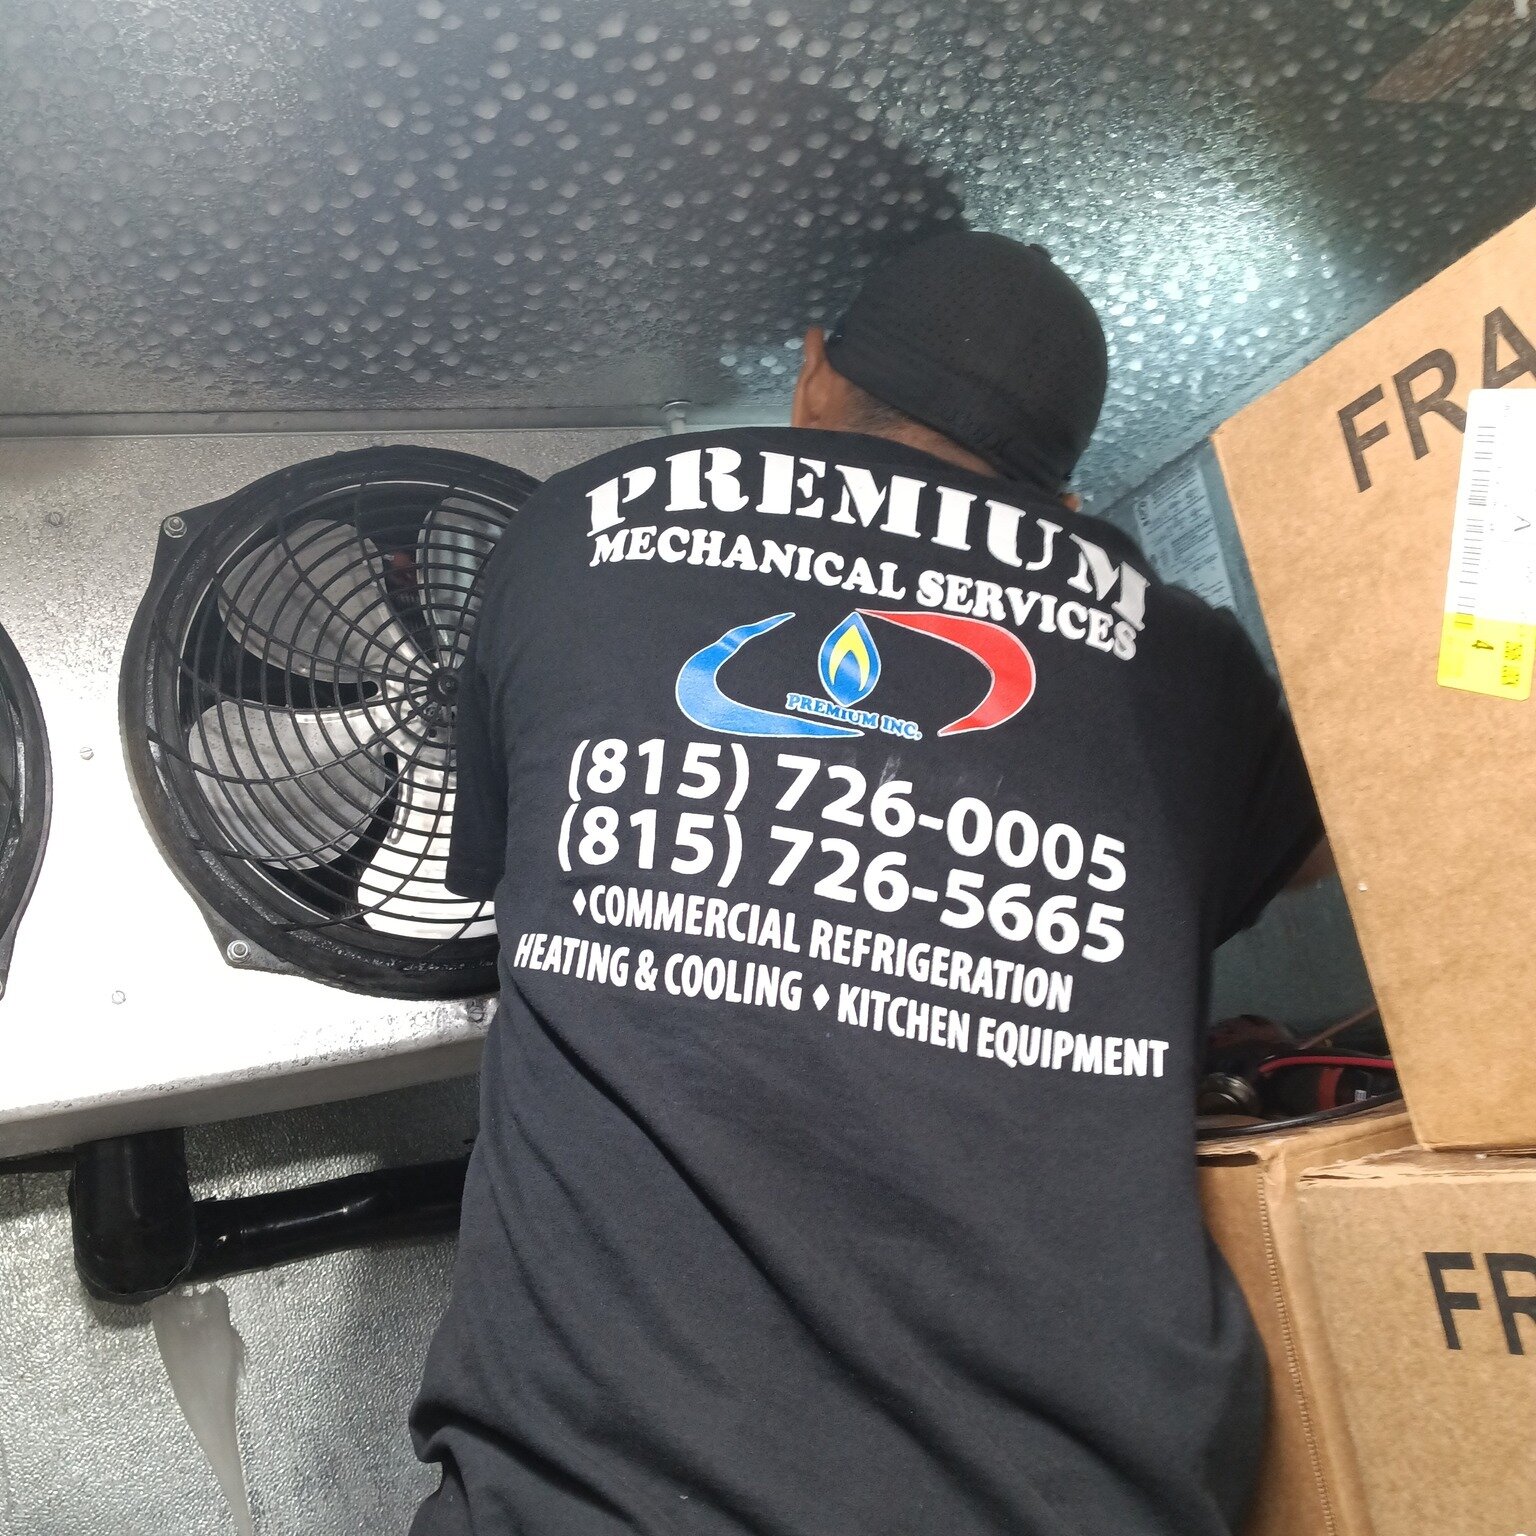 Servicing a walk-in for our commercial customer ❄🔥

Premium Heating &amp; Cooling is here for all commercial refrigeration needs. 🙂
☎(815)-726-5665☎

 #cresthill #Illinois #refrigerationsystems #refrigeration #residentialhvac #commercial #lemont #p